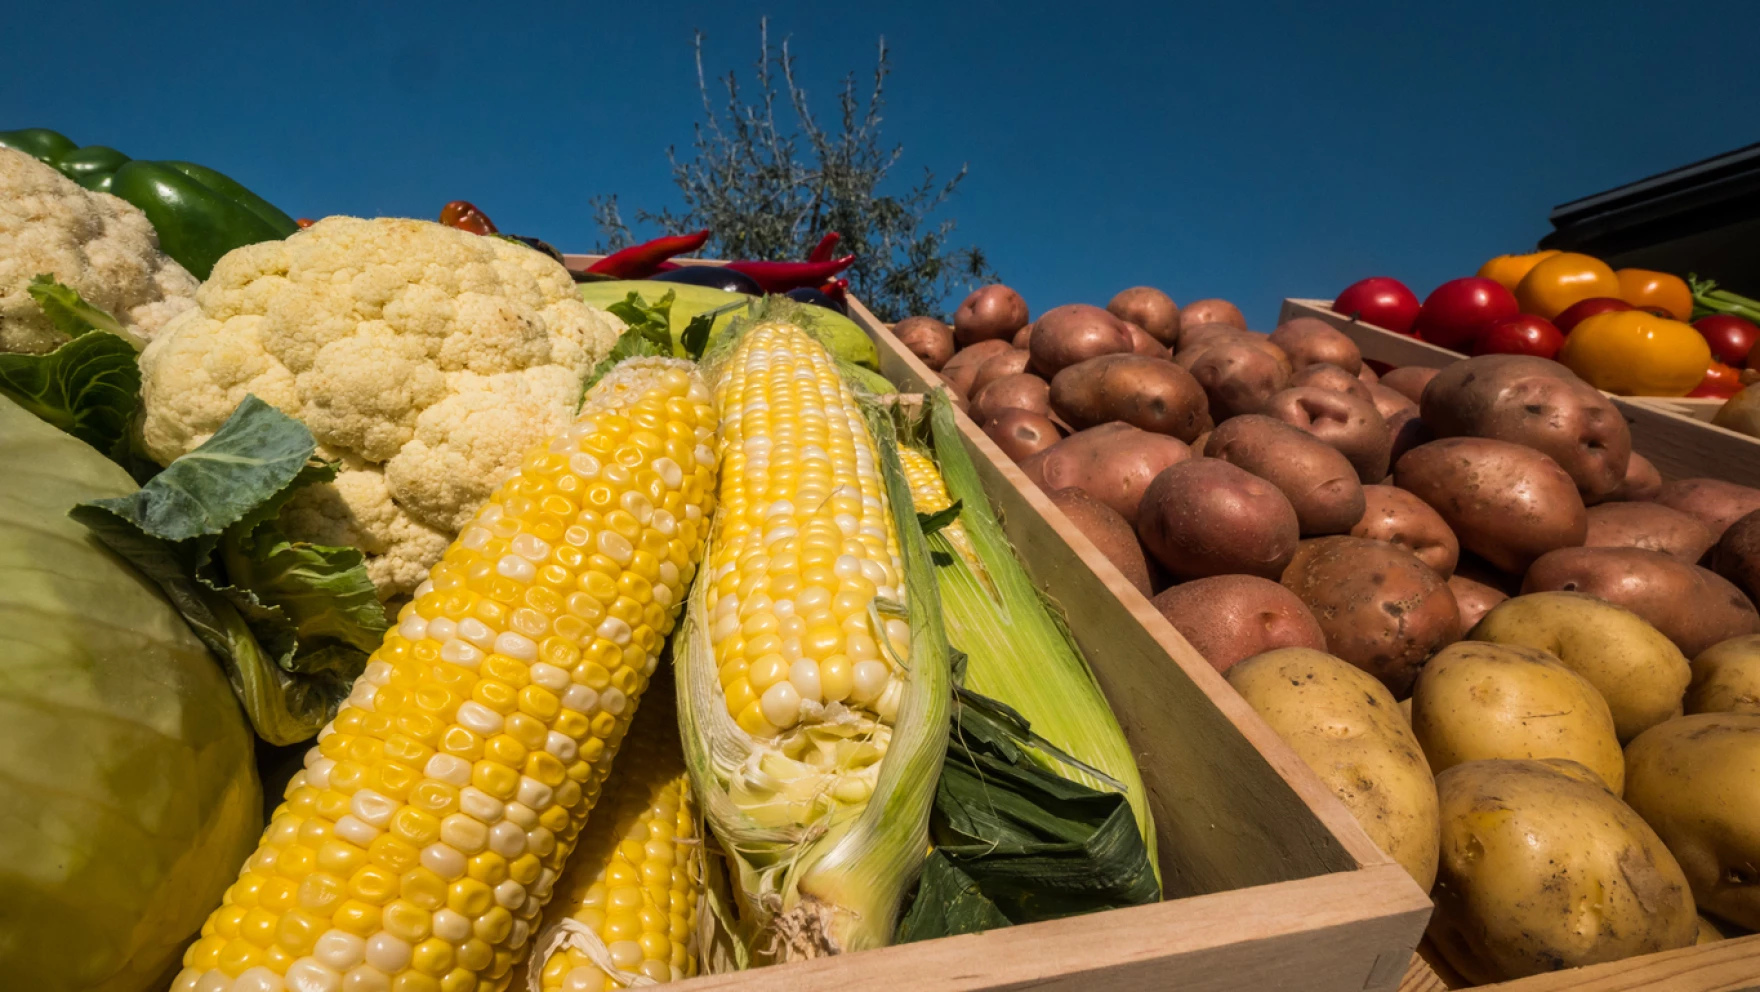 Growing local food businesses in the Midwest is at the heart of a new grant program